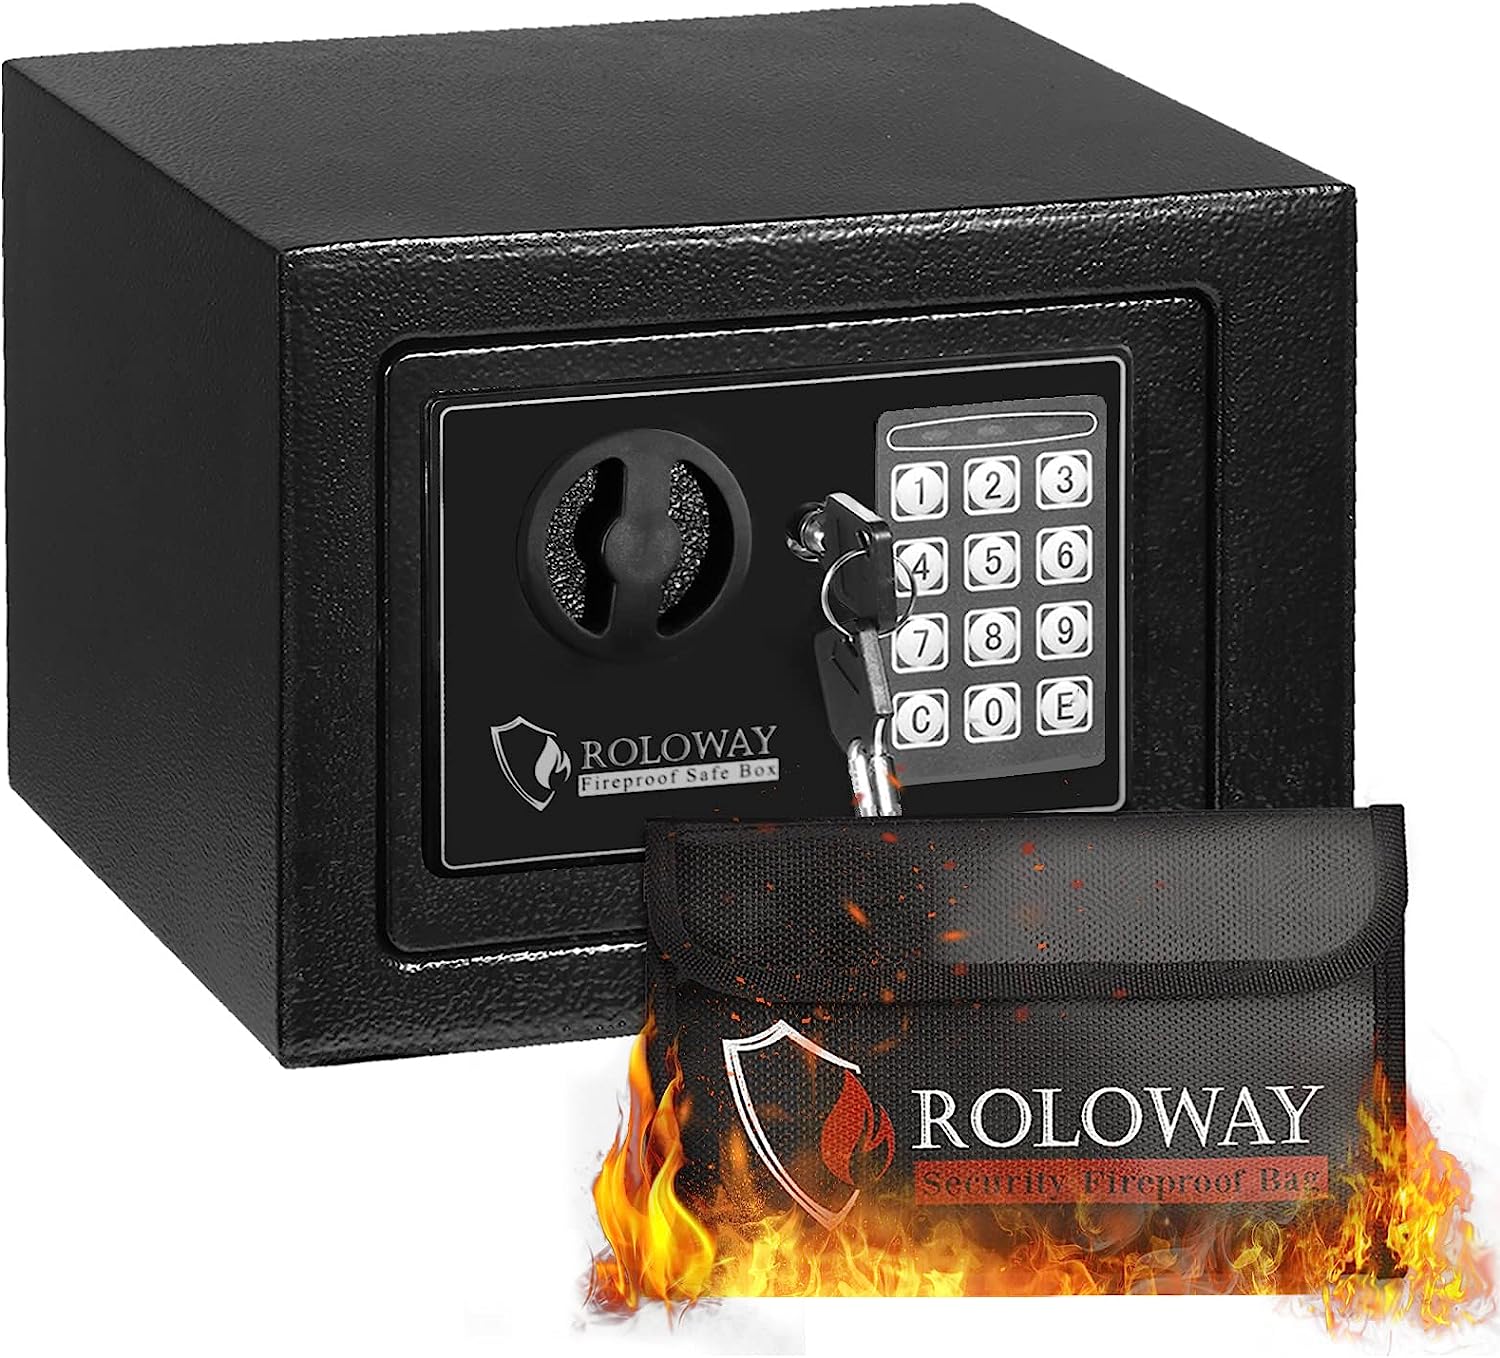 ROLOWAY Steel Safe for Money